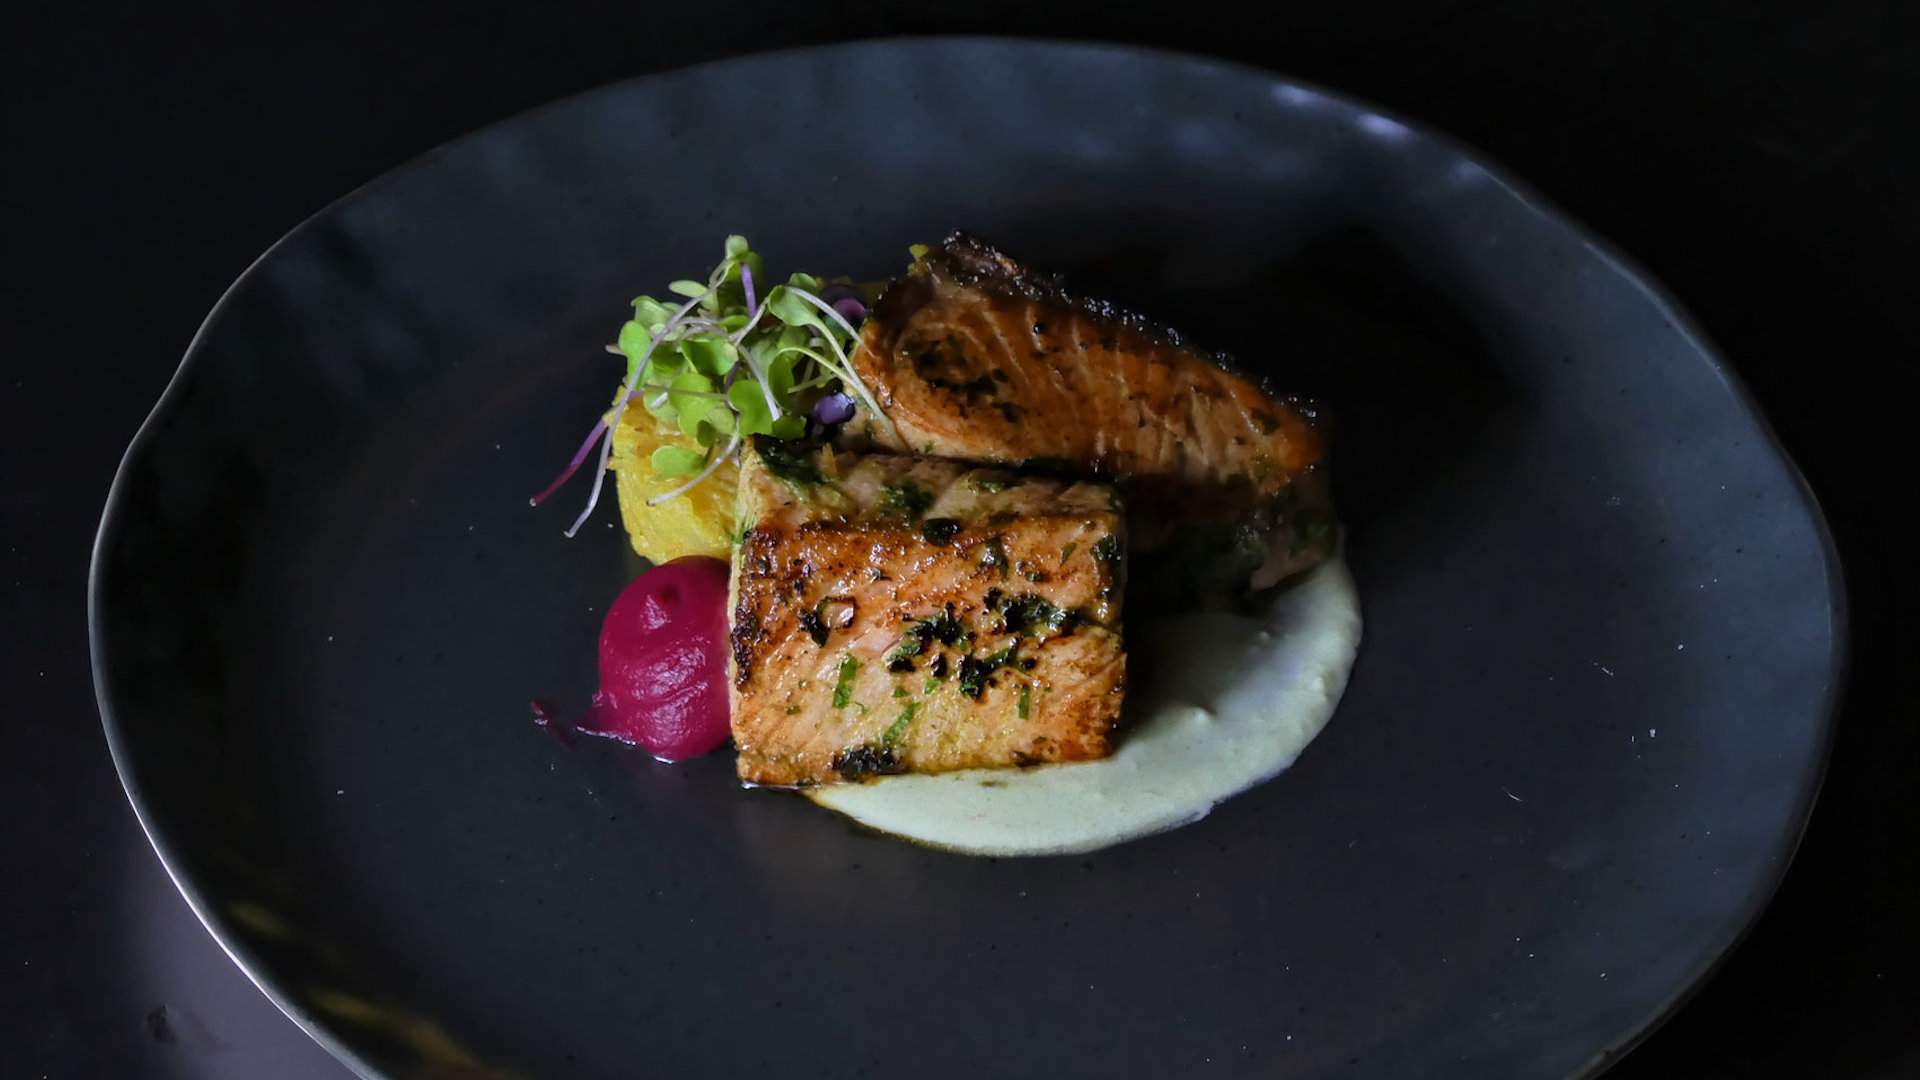 This New Parnell Opening Serves Molecular Indian Cuisine